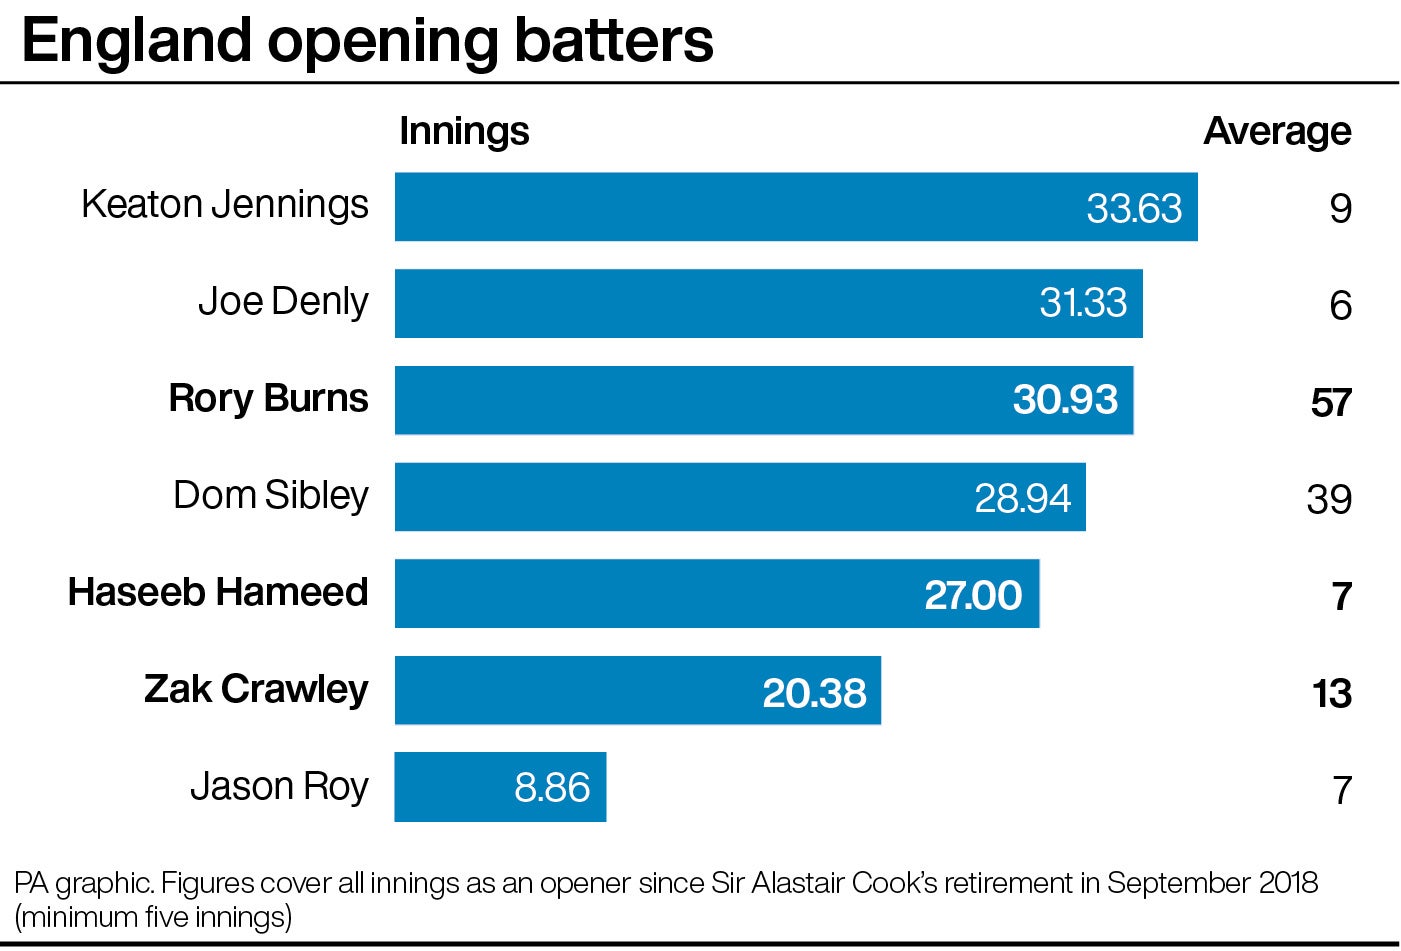 Rory Burns and Haseeb Hameed are among the England openers to struggle in recent years (PA graphic)